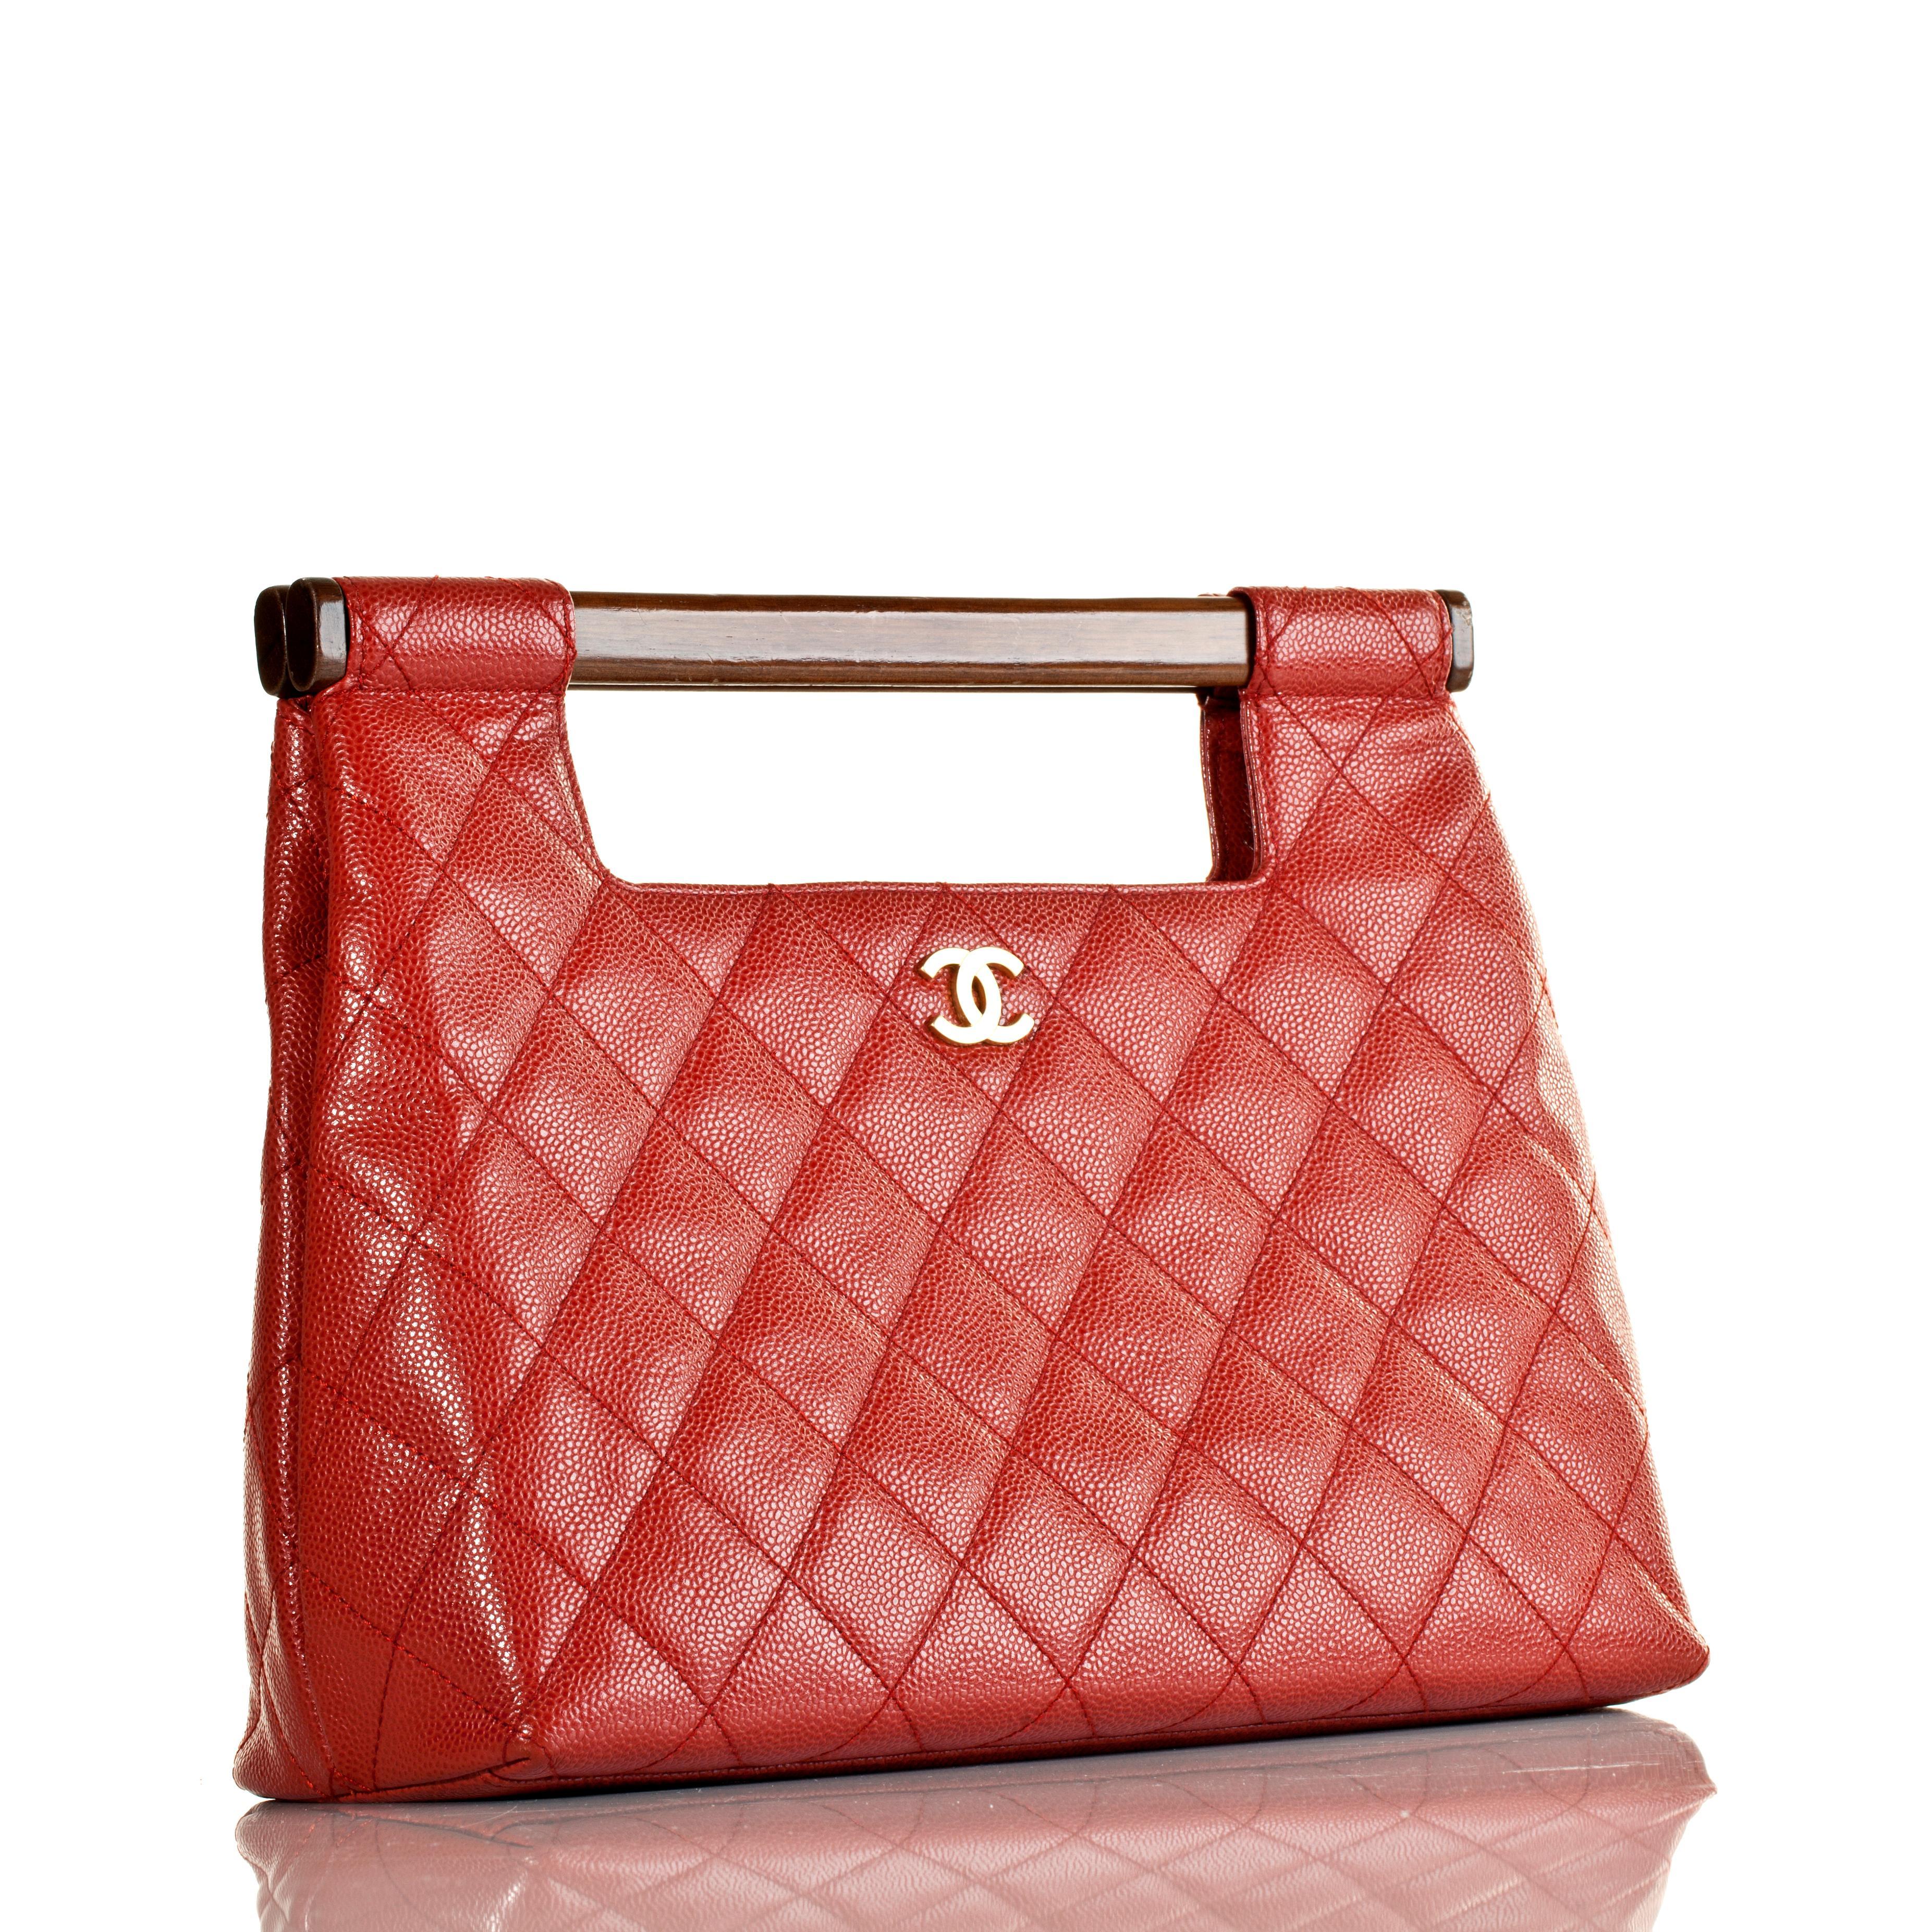 Chanel 2003 Wood Top Handle Rare Red Caviar Jumbo Kelly Envelope Clutch Tote Bag In Good Condition For Sale In Miami, FL